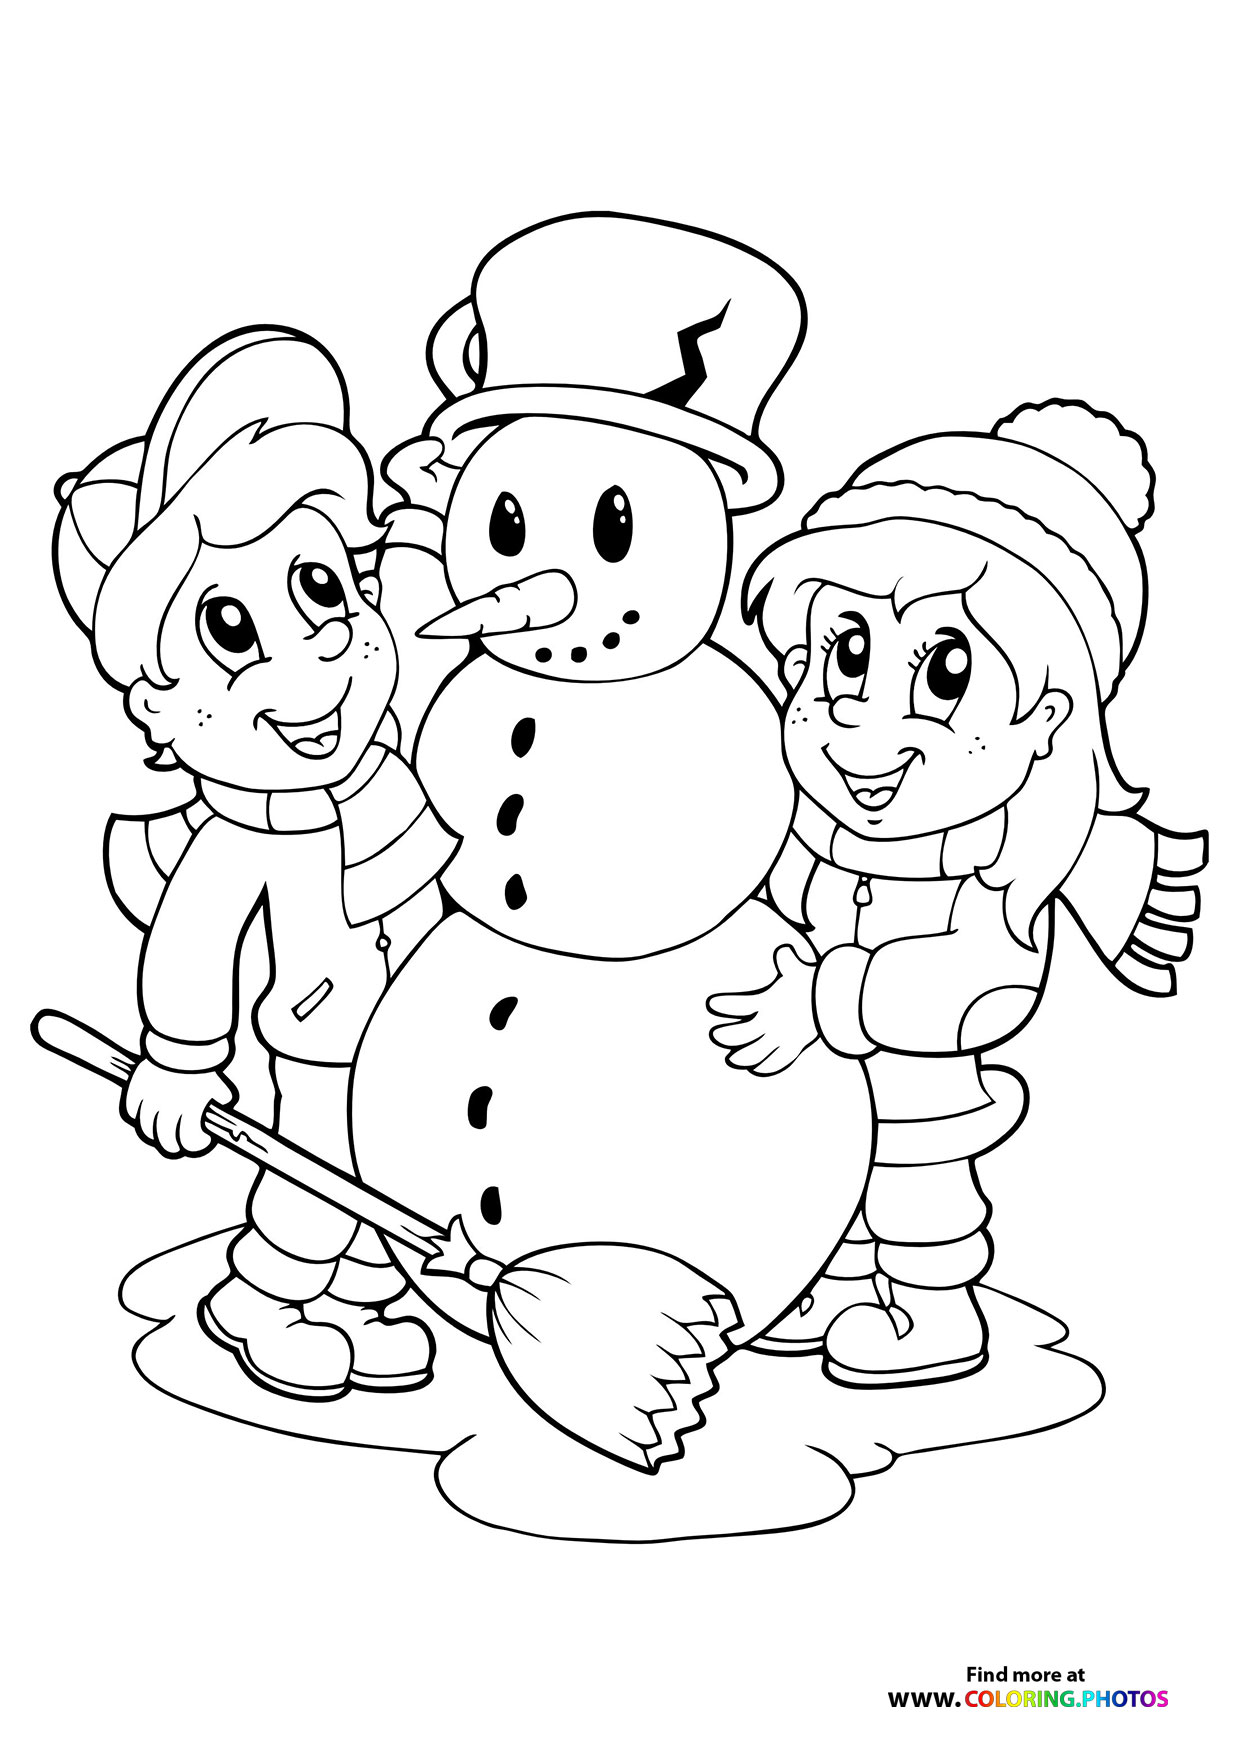 Boy and girl build a snowman - Coloring Pages for kids